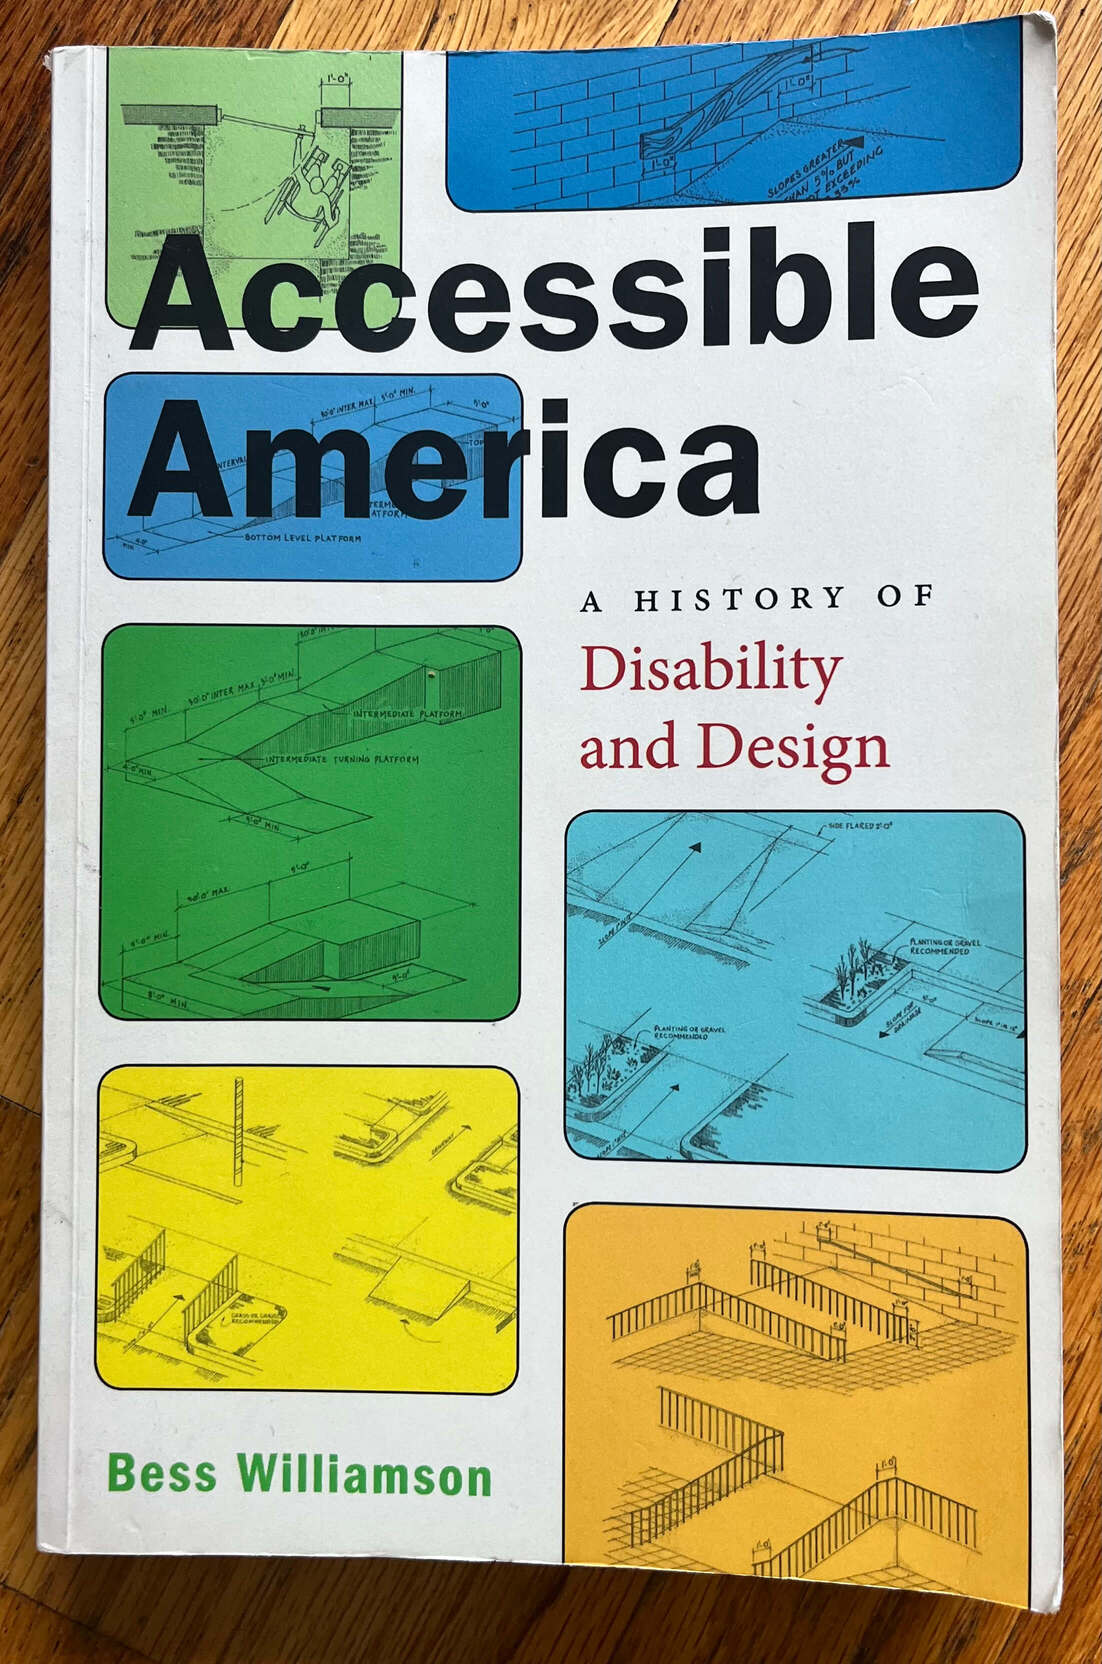 “Accessible America: A History of Disability and Design” by Bess Williamson.